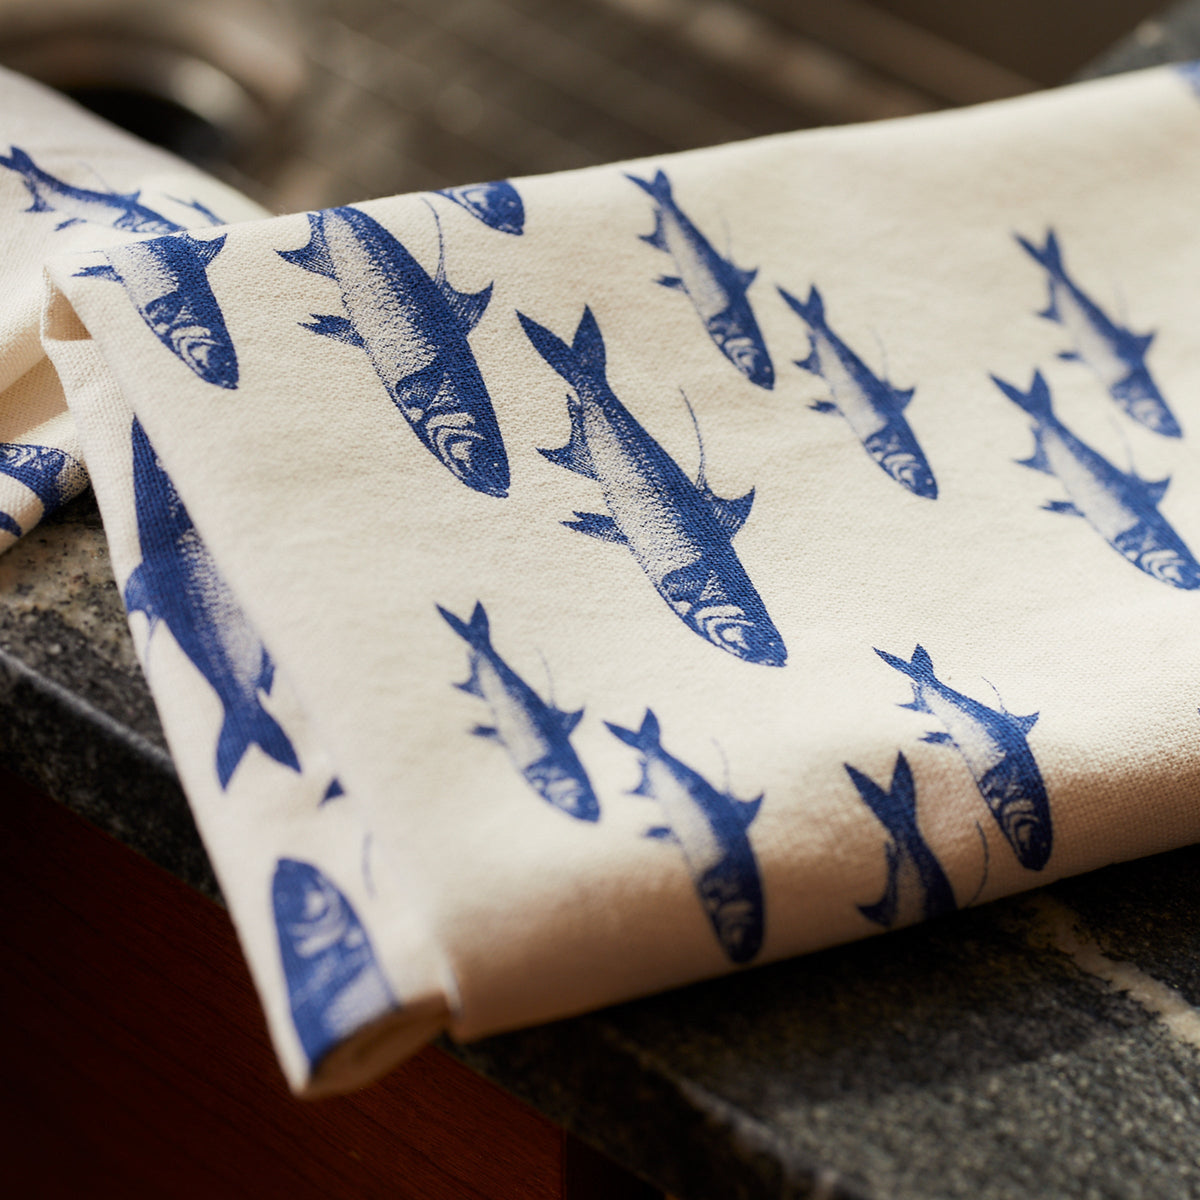 A blue and white School of Fish Kitchen Towel, Set of 2 from Caskata draped over a kitchen countertop.